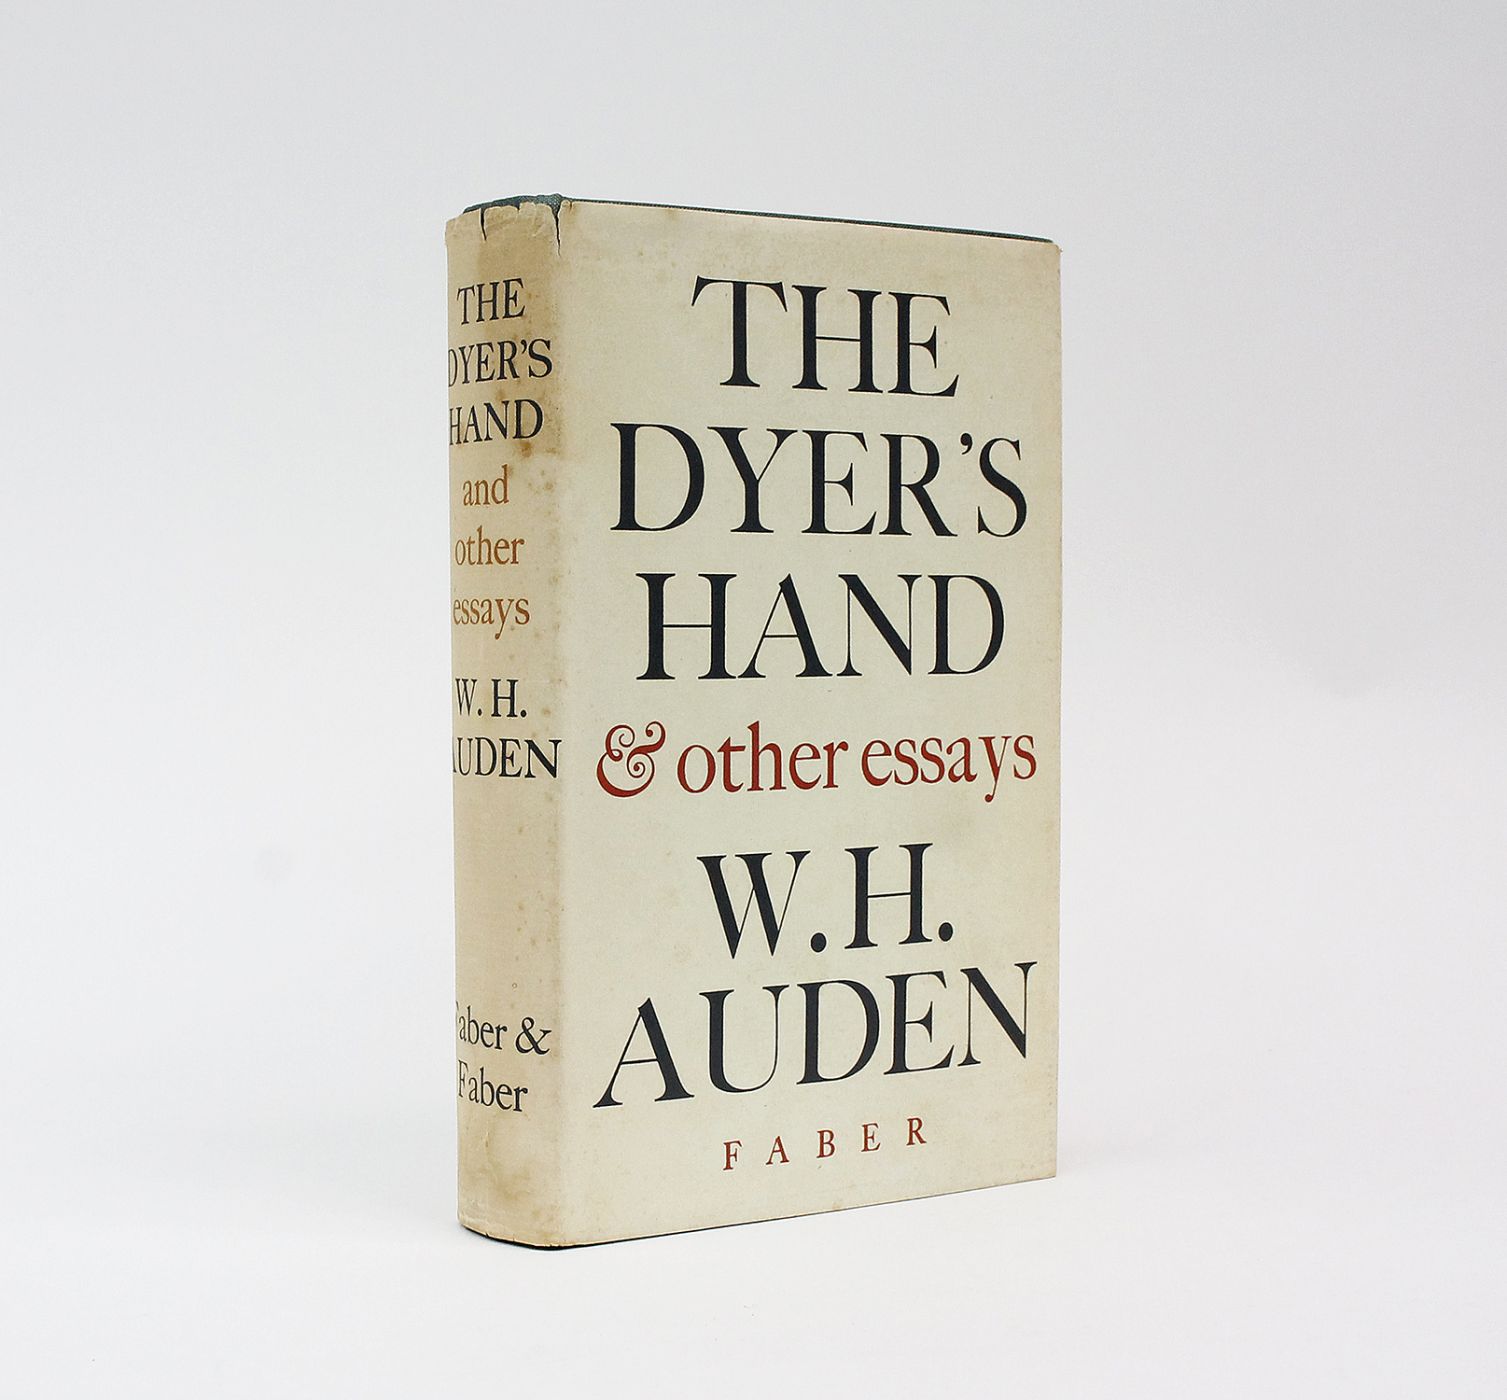 THE DYER'S HAND -  image 1